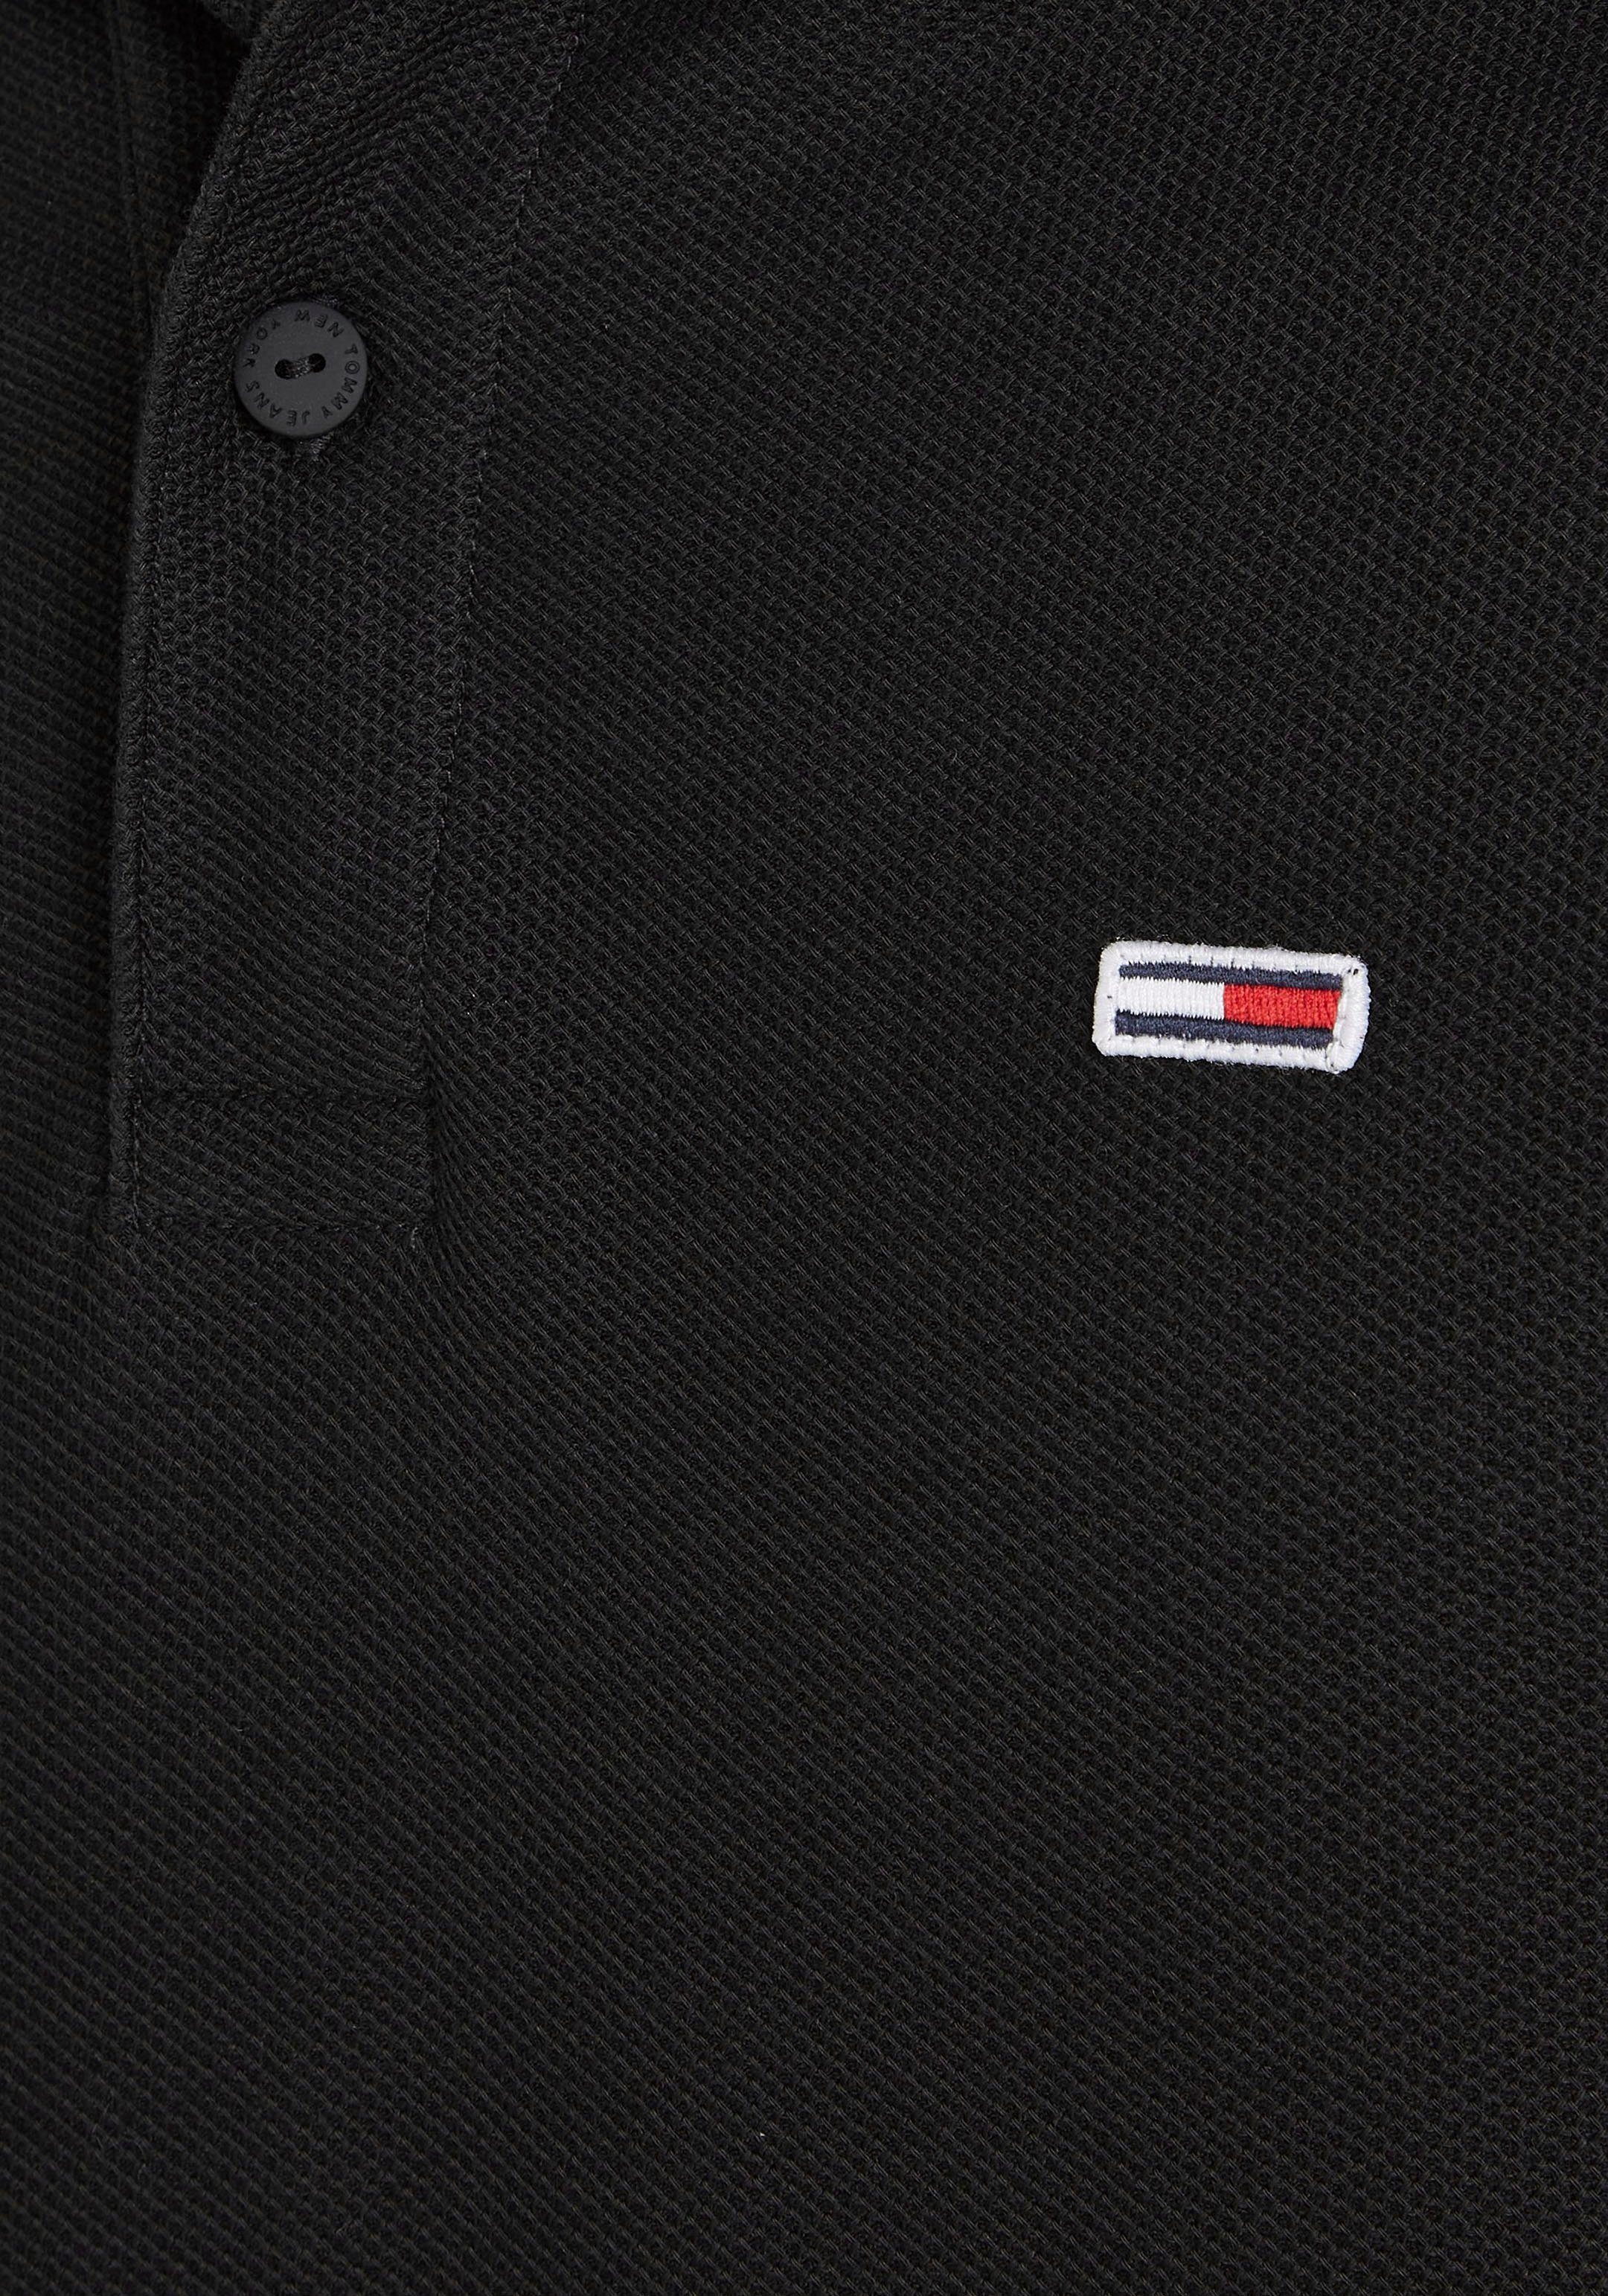 mit Jeans Black Poloshirt CLSC POLO TIPPING Polokragen TJM Tommy